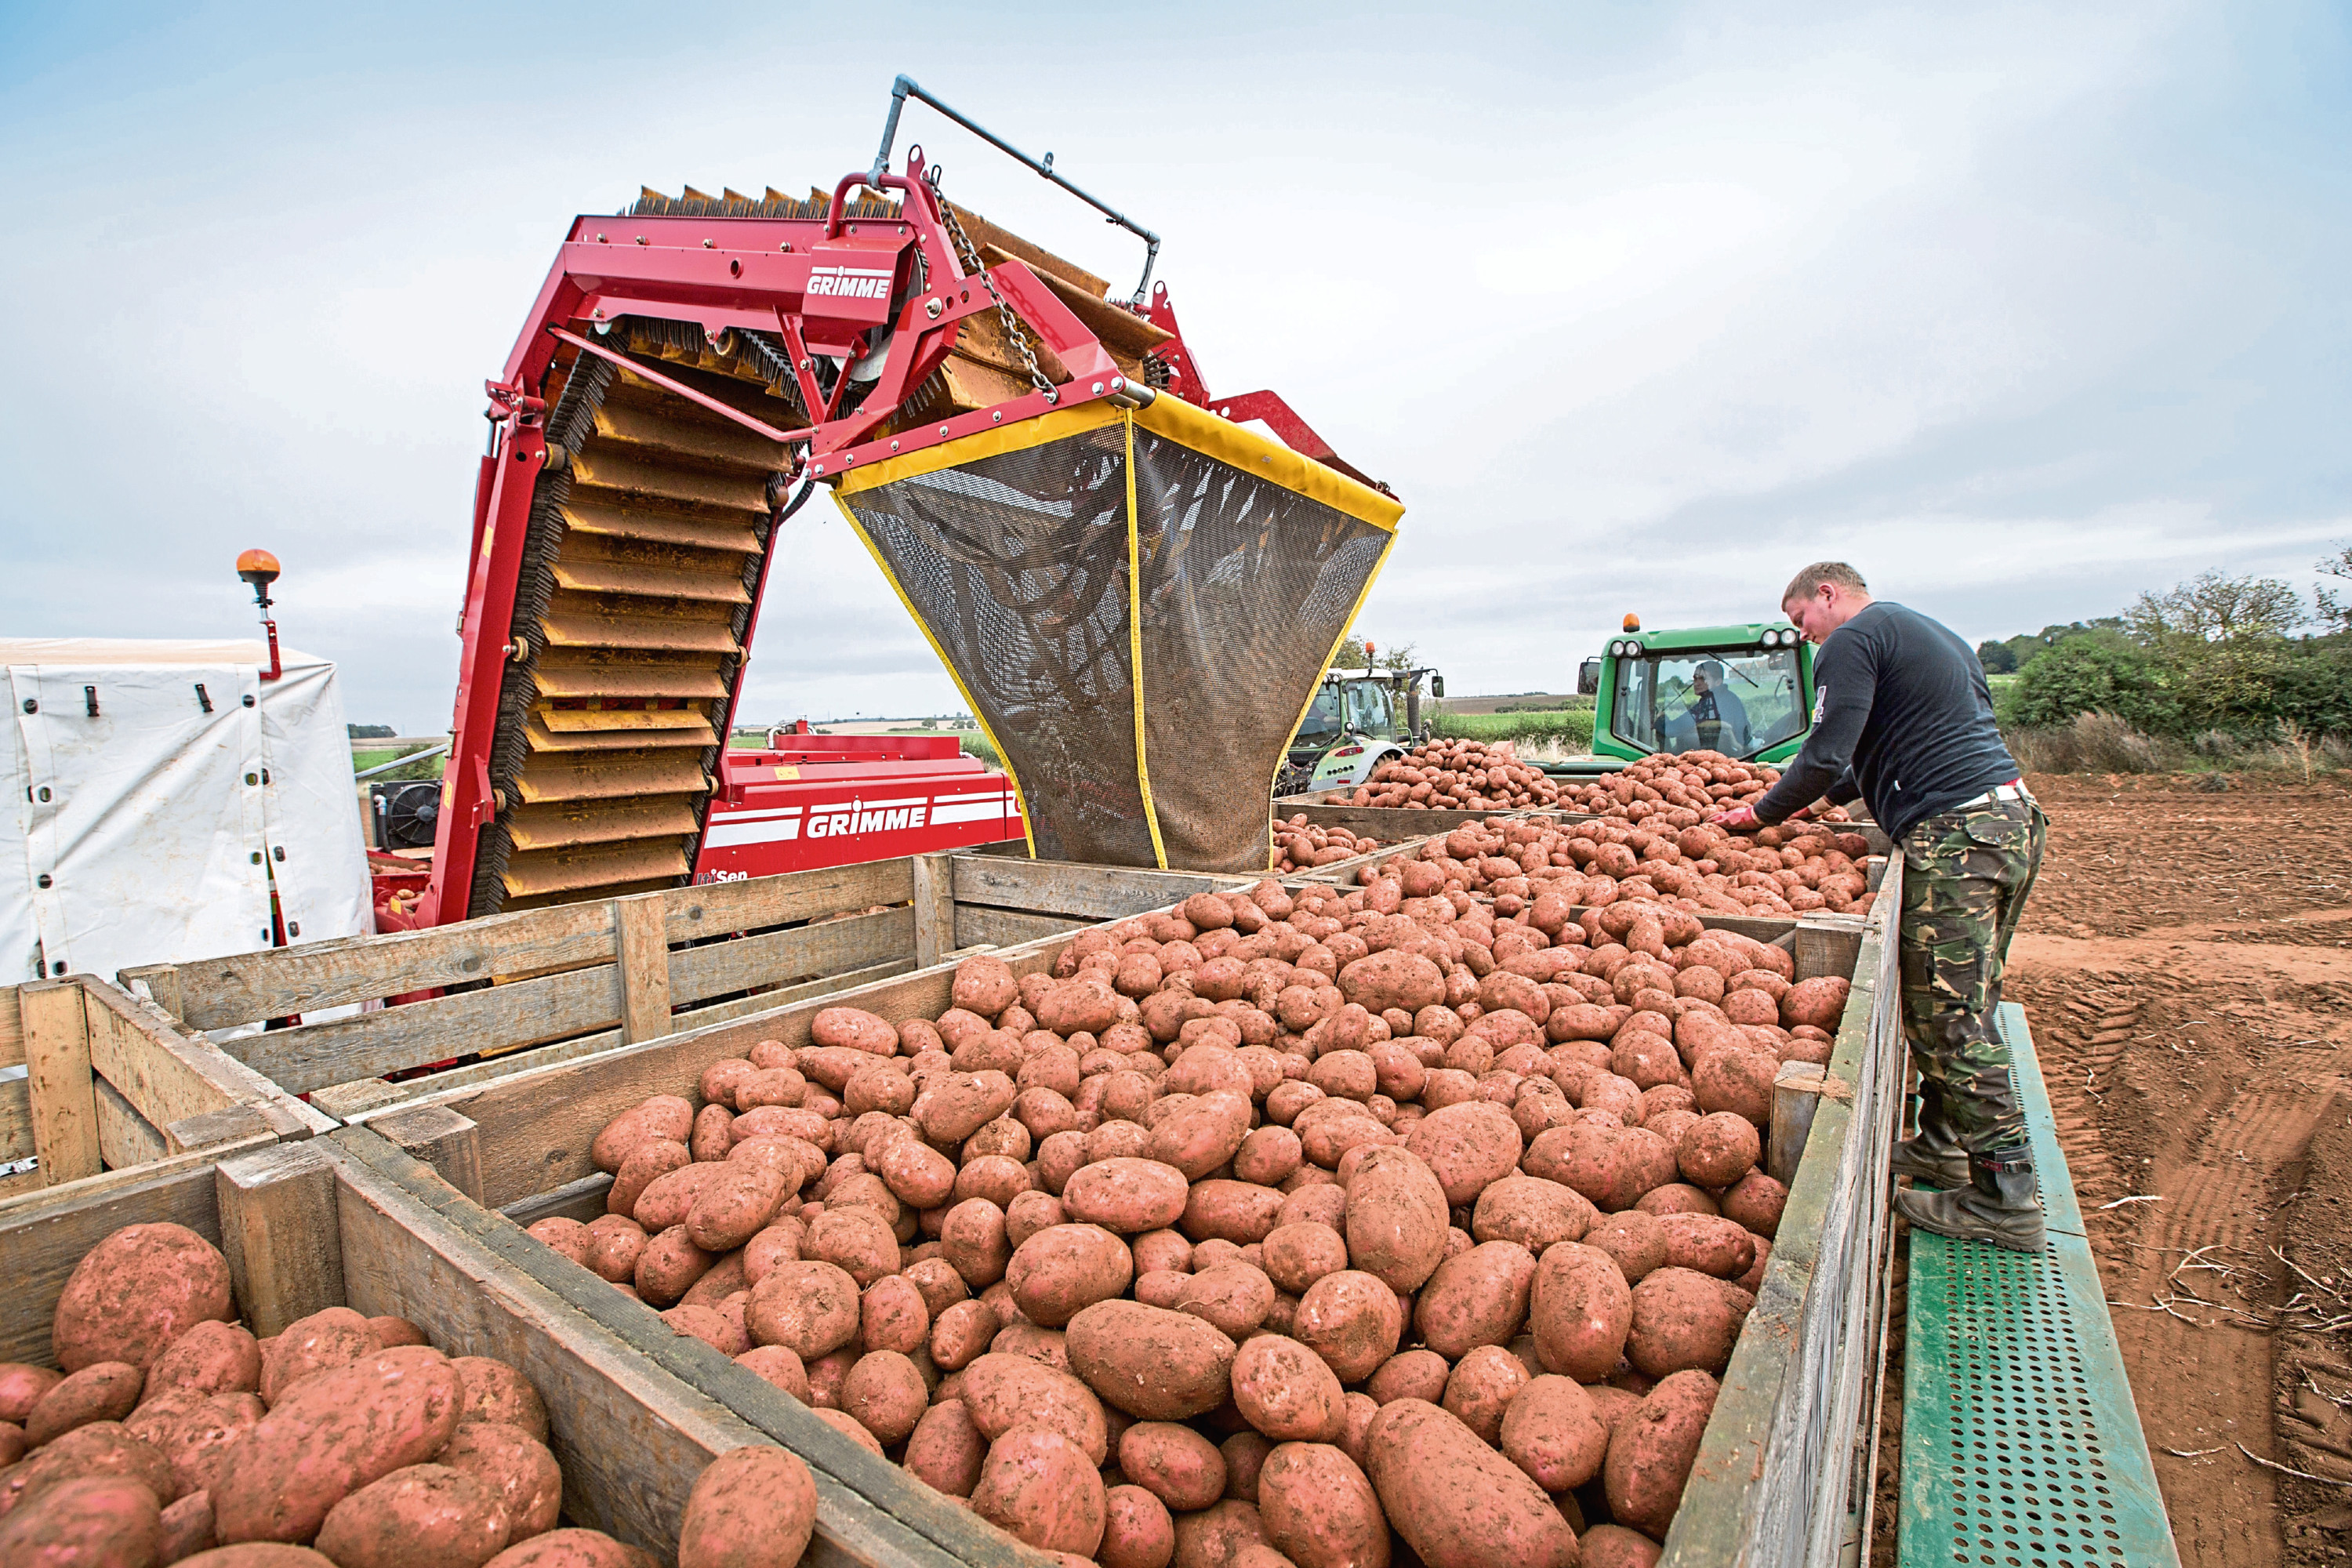 The compost could help potato growers deal with PCN.